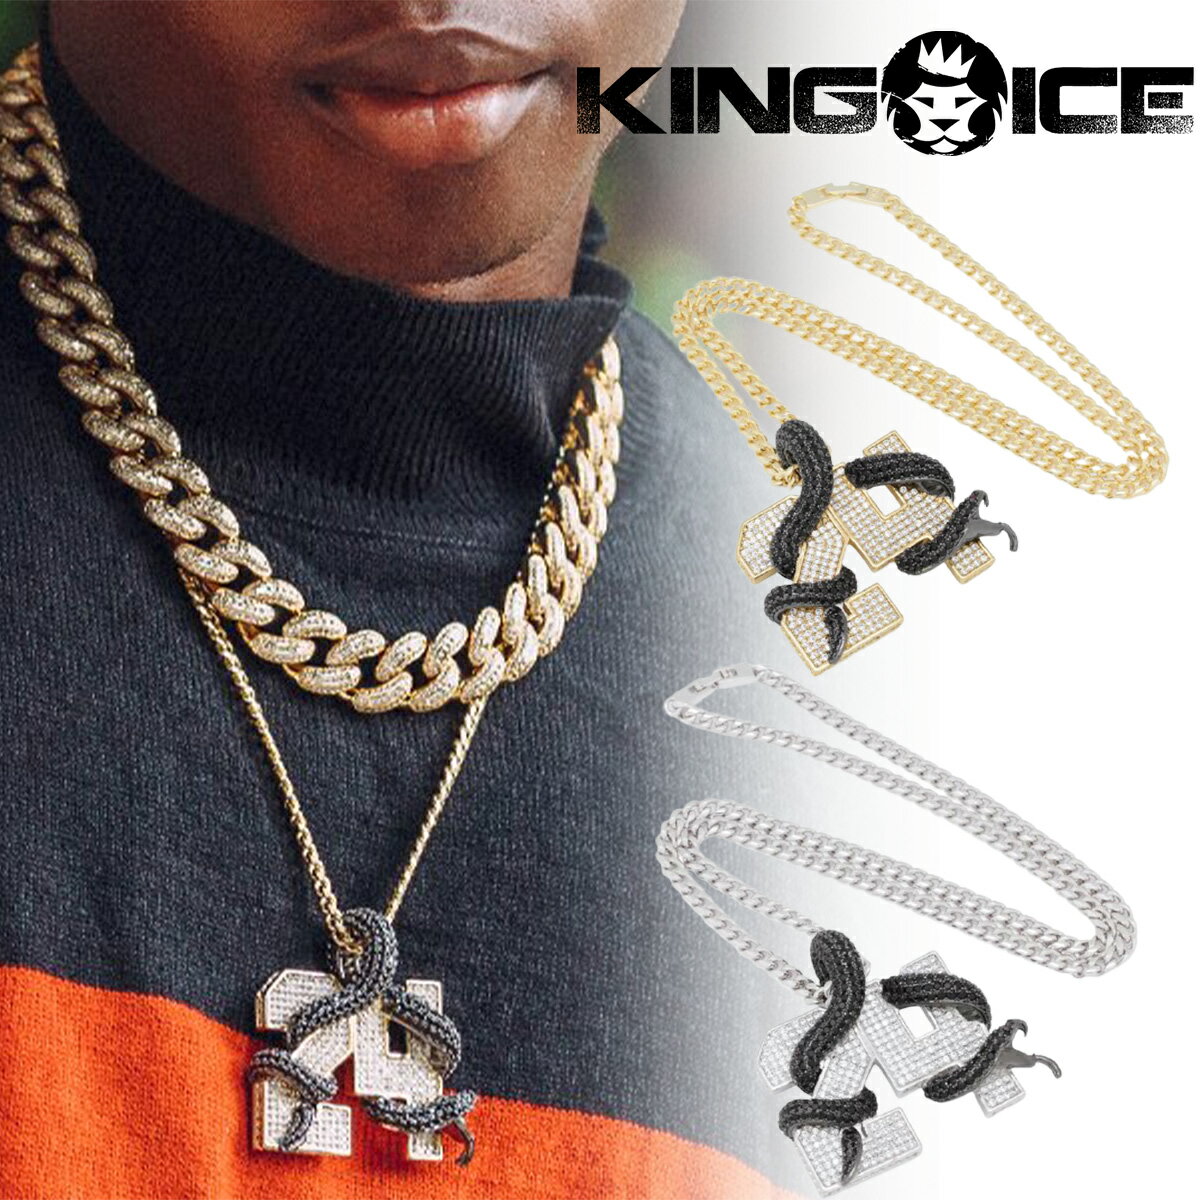 KING ICE LOACX lbNX `F[ BLACK MAMBA NUMBER 24 NECKLACE 14kS[h  WHITE GOLD lC[ANZT[]